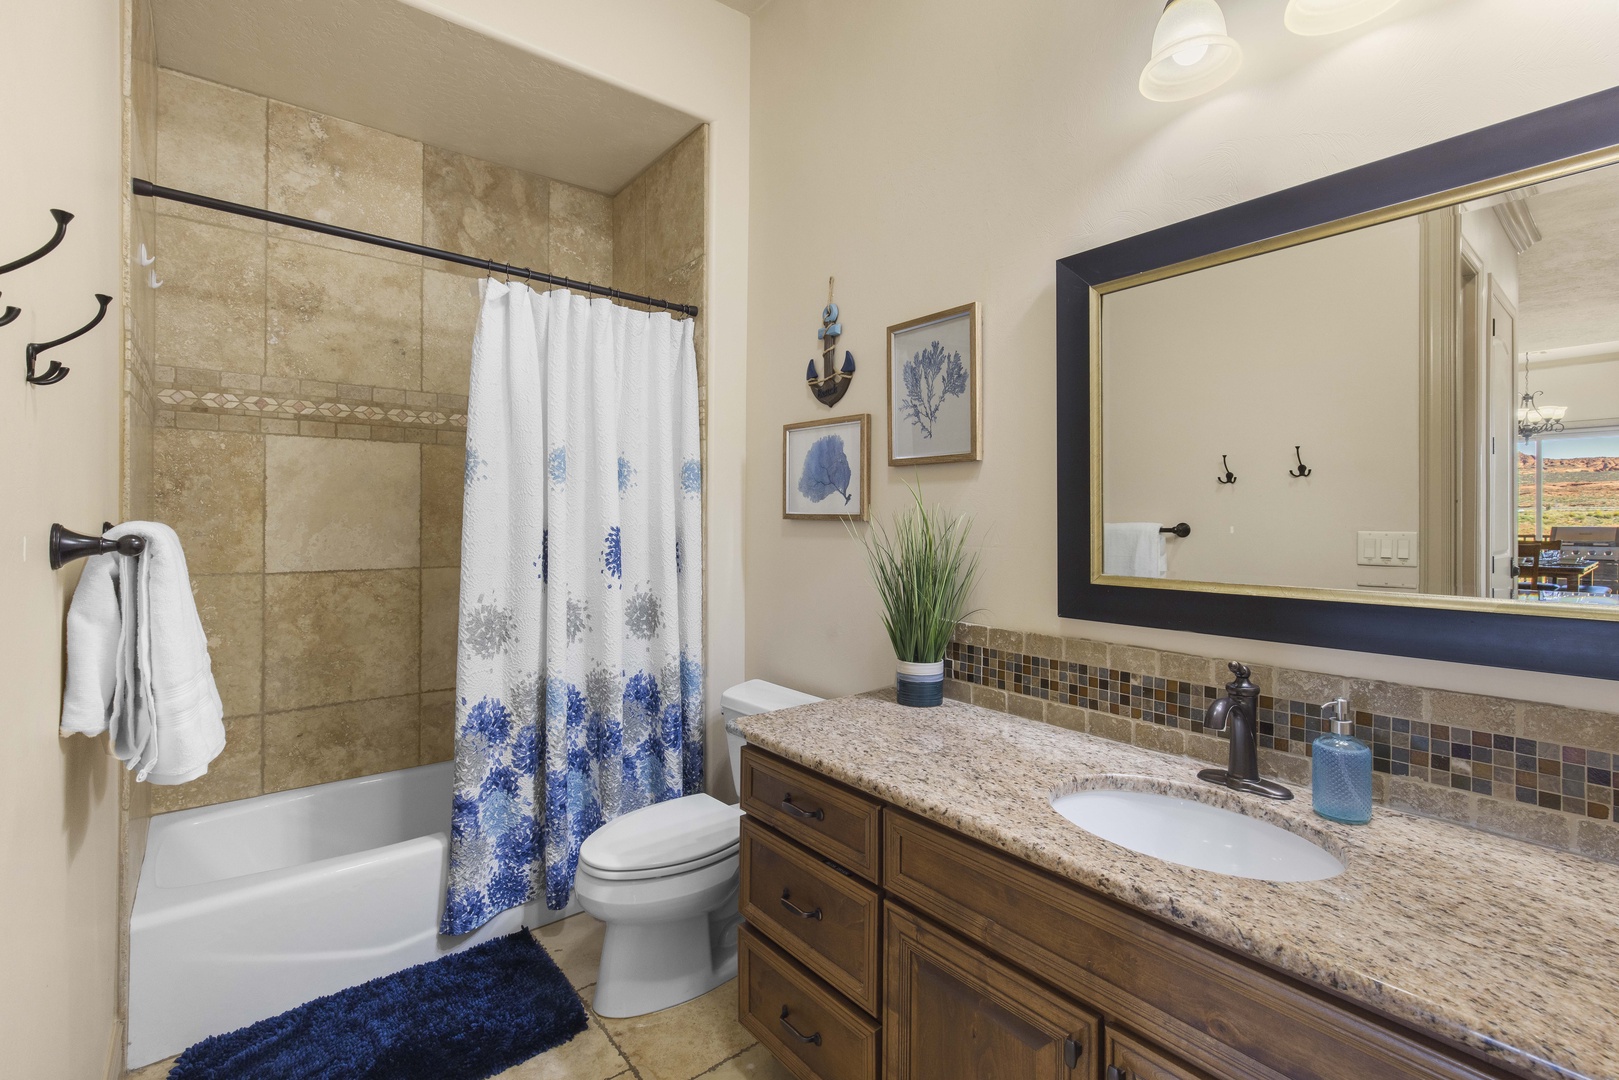 This full bathroom offers an oversized single vanity & shower/tub combo